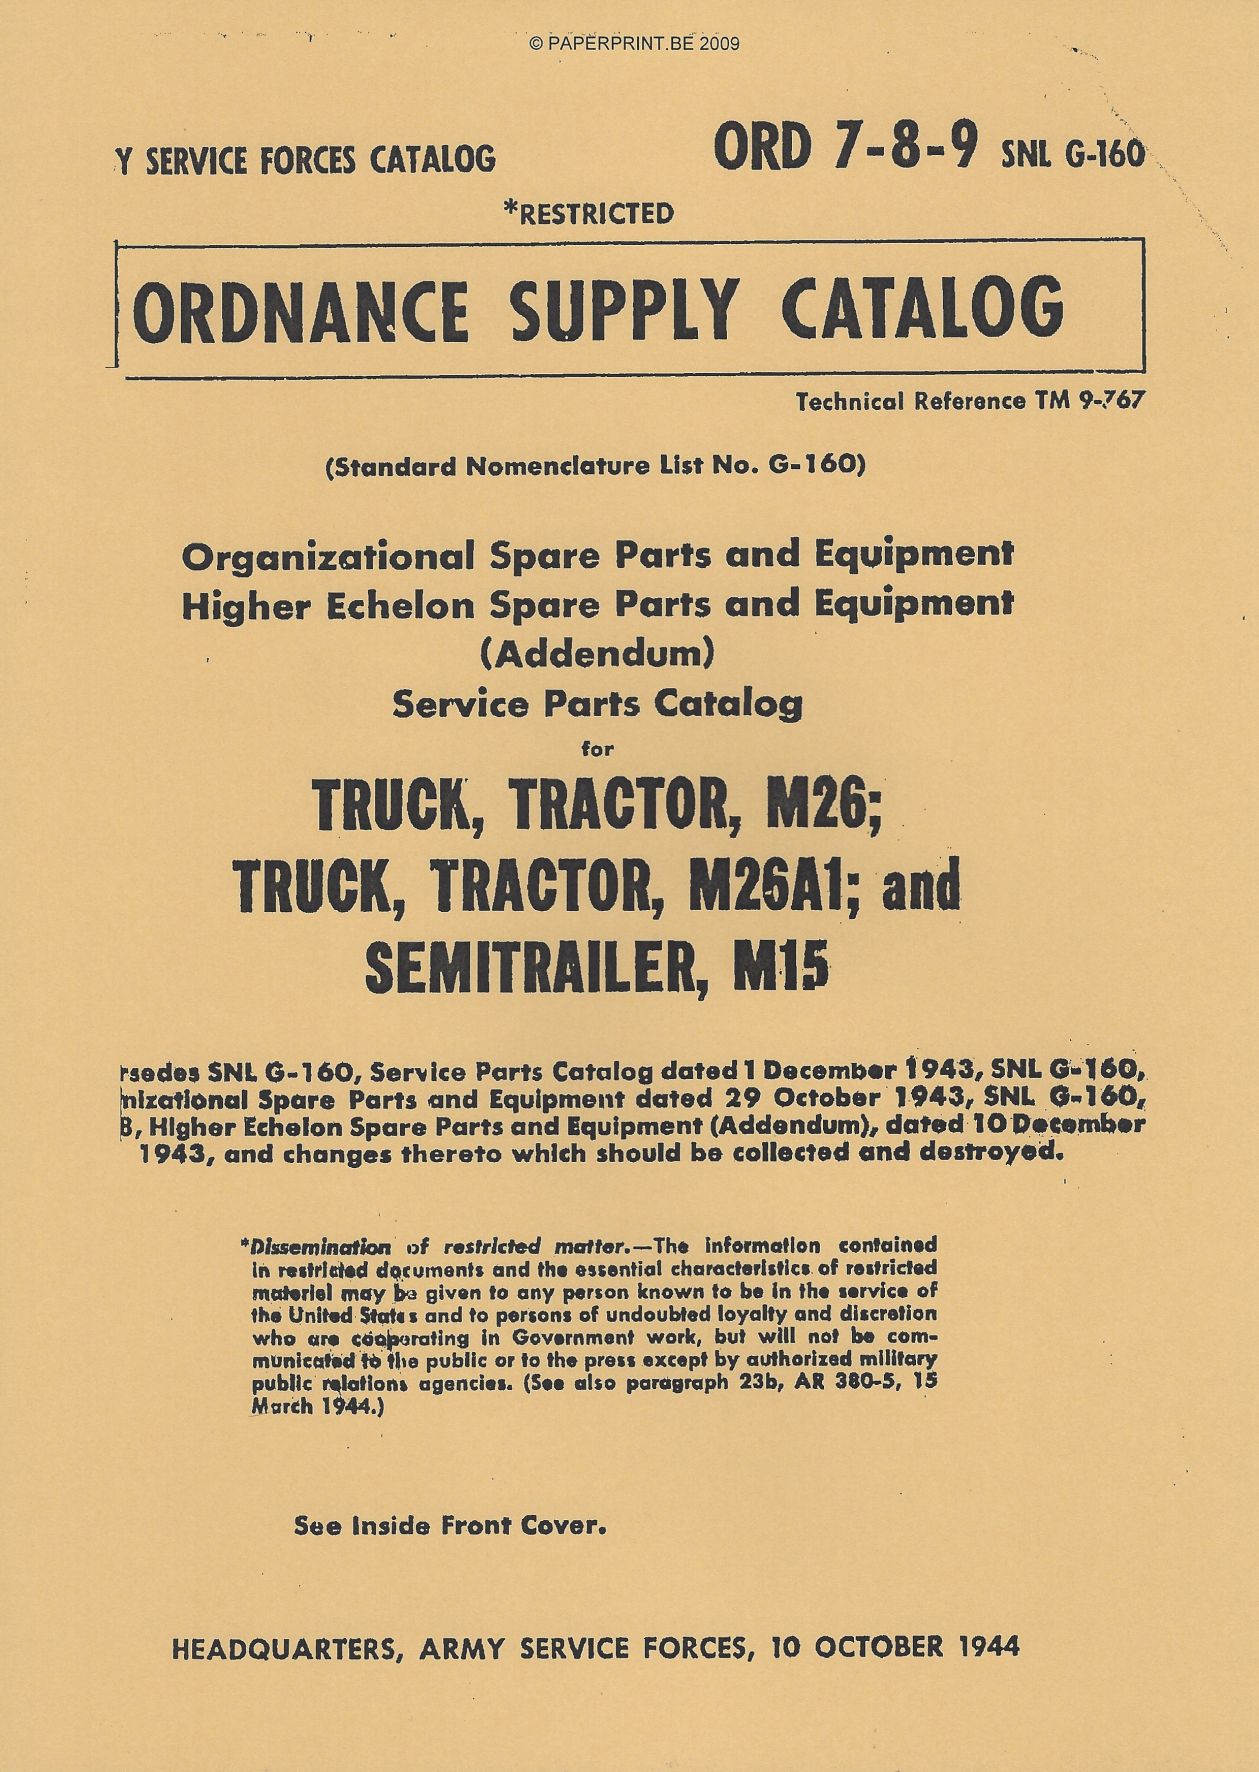 SNL G-160 US SERVICE PARTS CATALOG FOR TRUCK, TRACTOR, M26 TRUCK, TRACTOR, M26A1, AND SEMITRAILER, M15